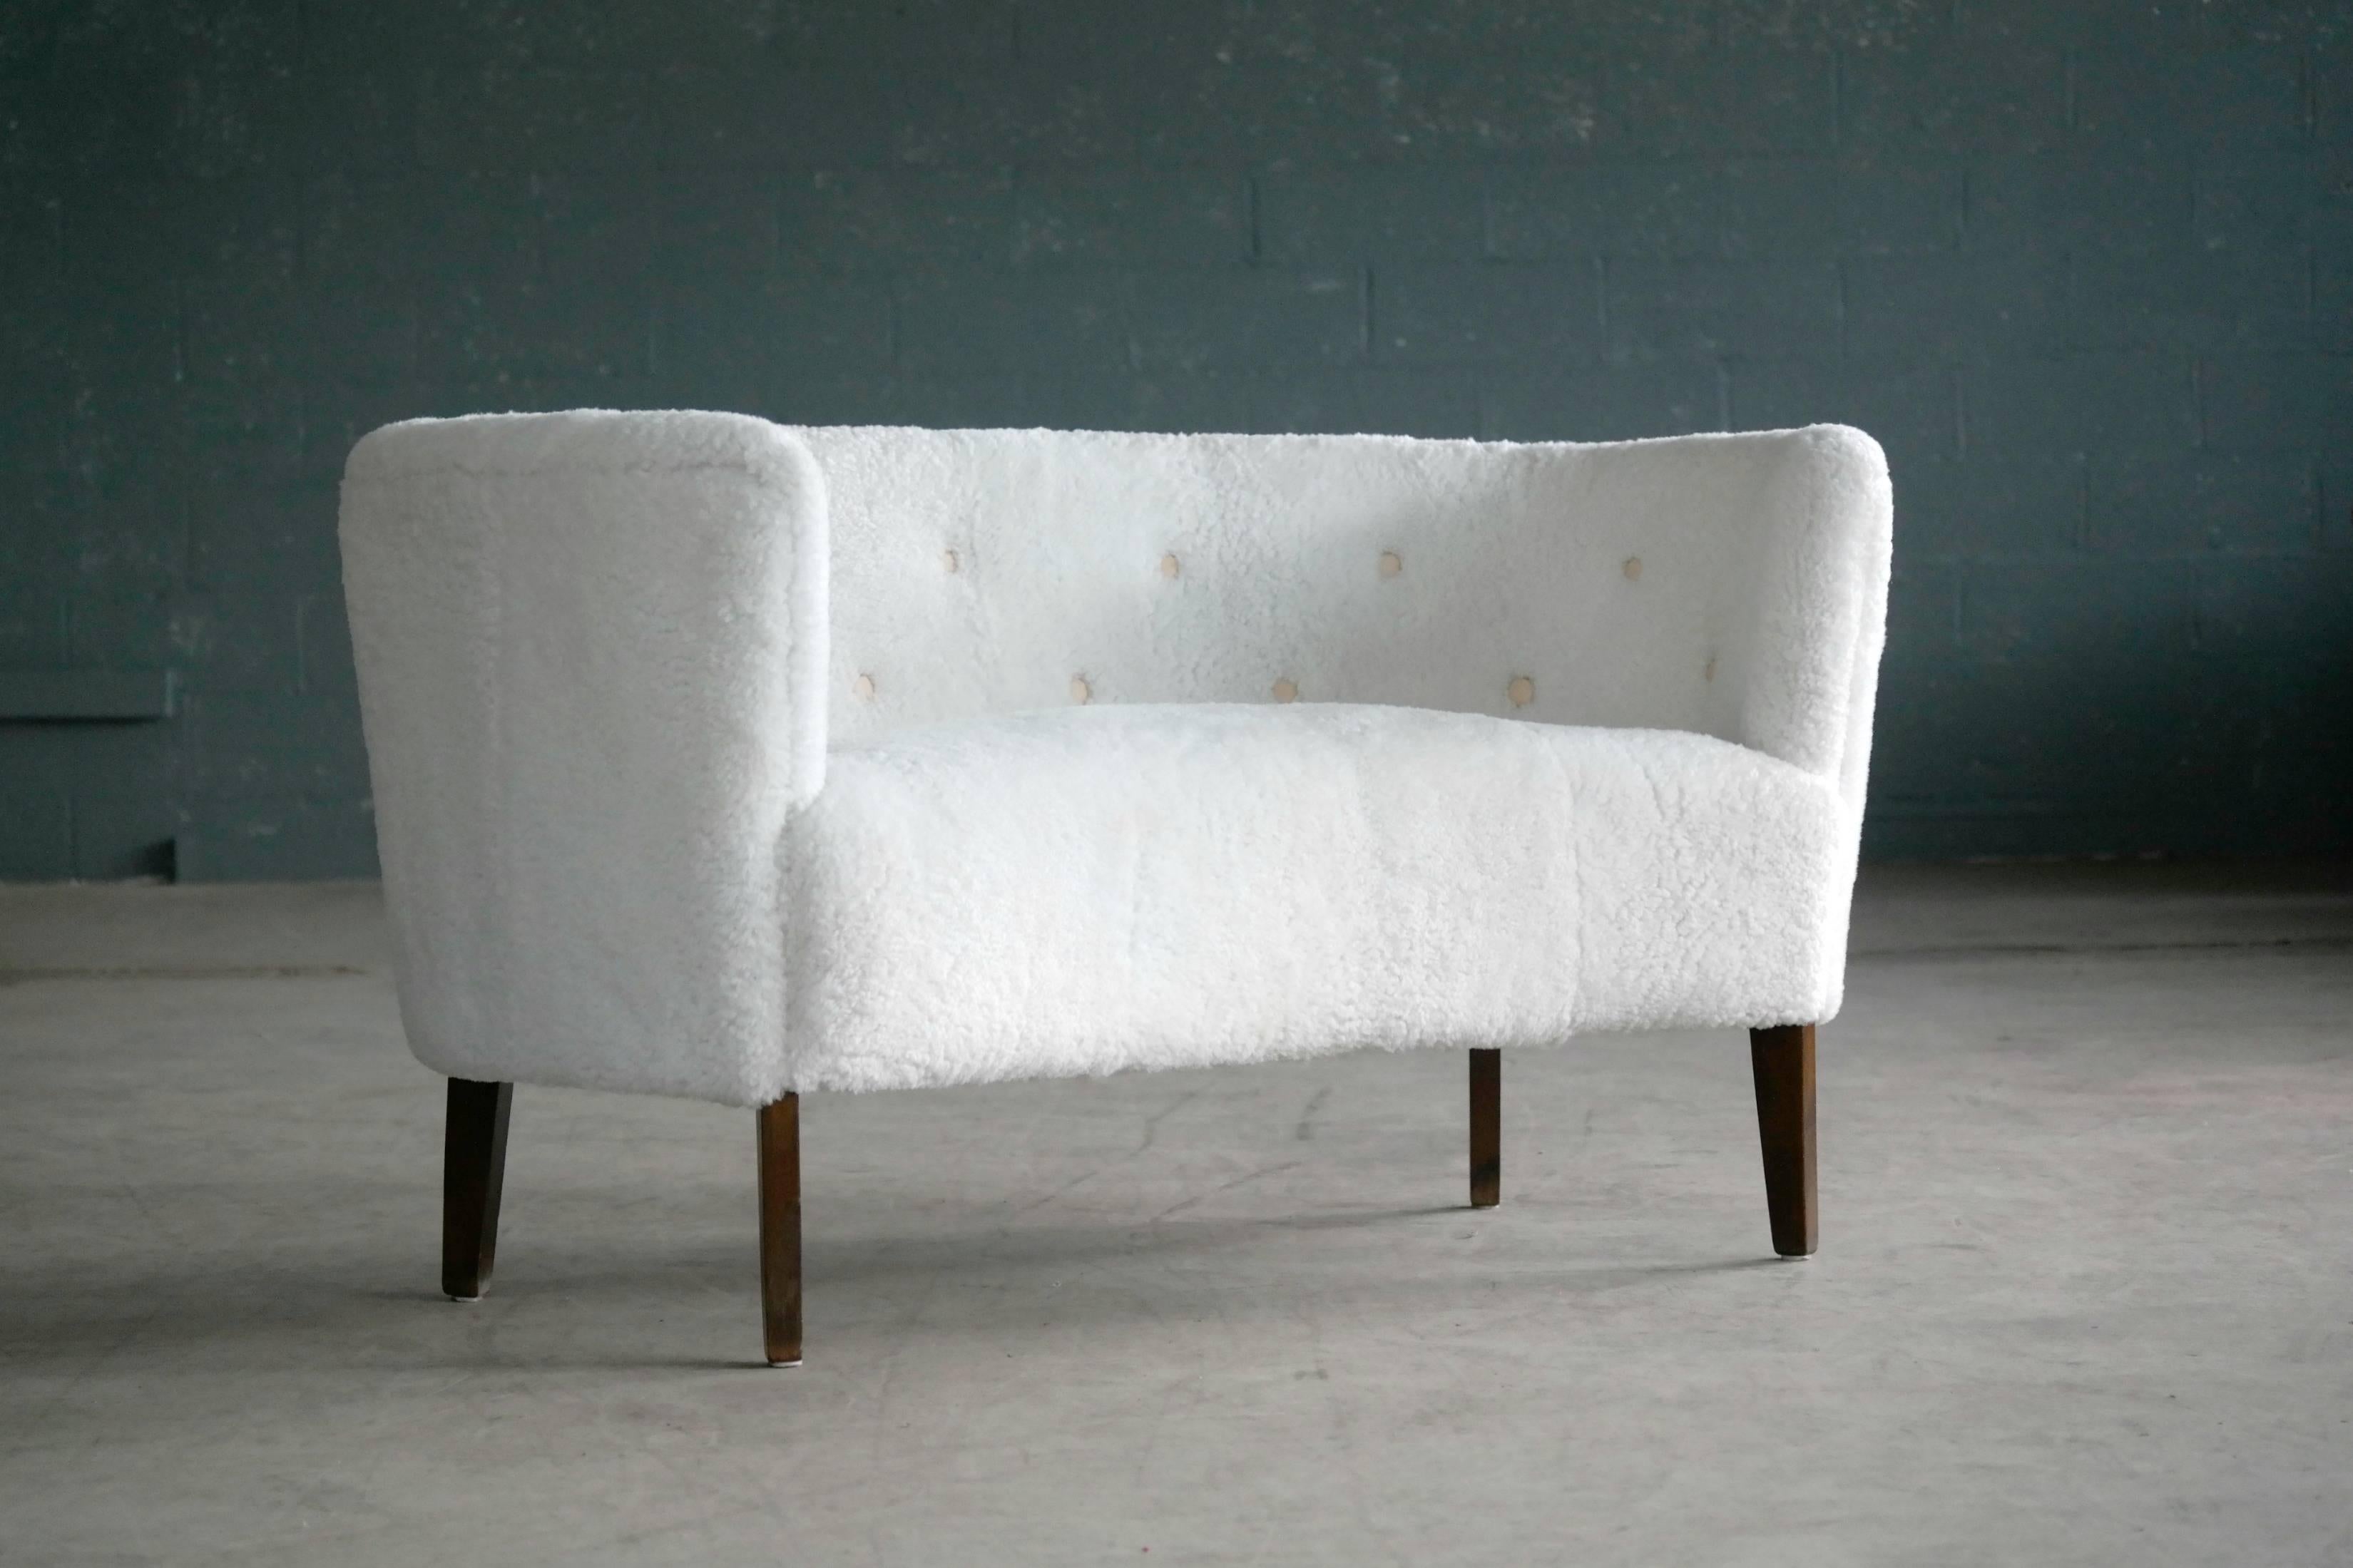 Very sophisticated and stylish petite curved settee in the classic style of Flemming Lassen and Georg Kofoed and also bearing resemblance to some of Finn Juhl's popular designs. Upholstered in white lambsfur with leather buttons, raised on stained